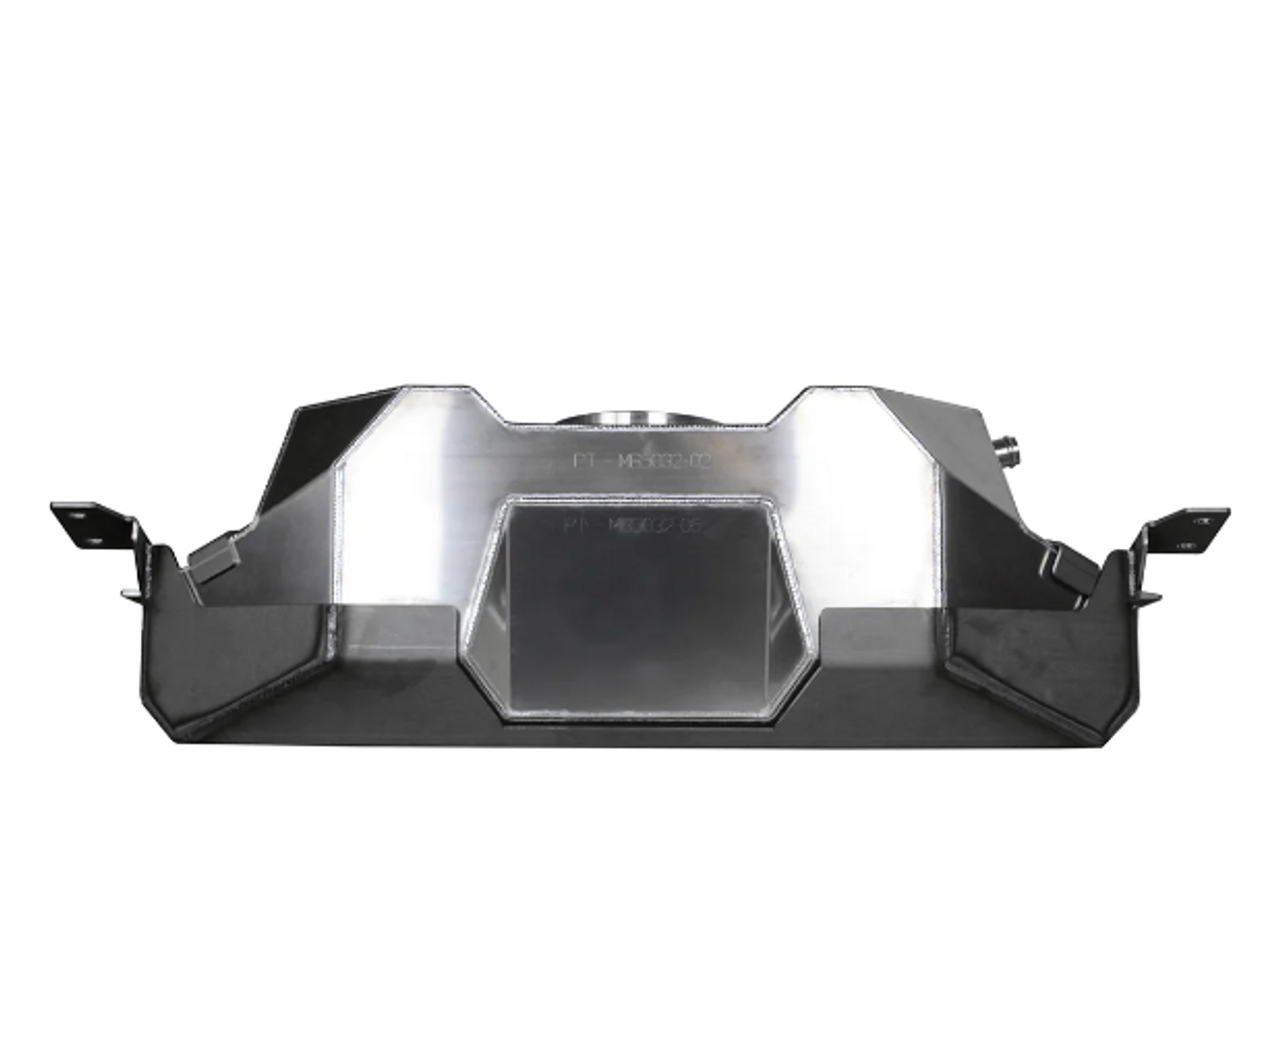 Motobilt Rear Fuel Tank with Skid Plate for Jeep Wrangler JK with Factory Frame 2007-2018